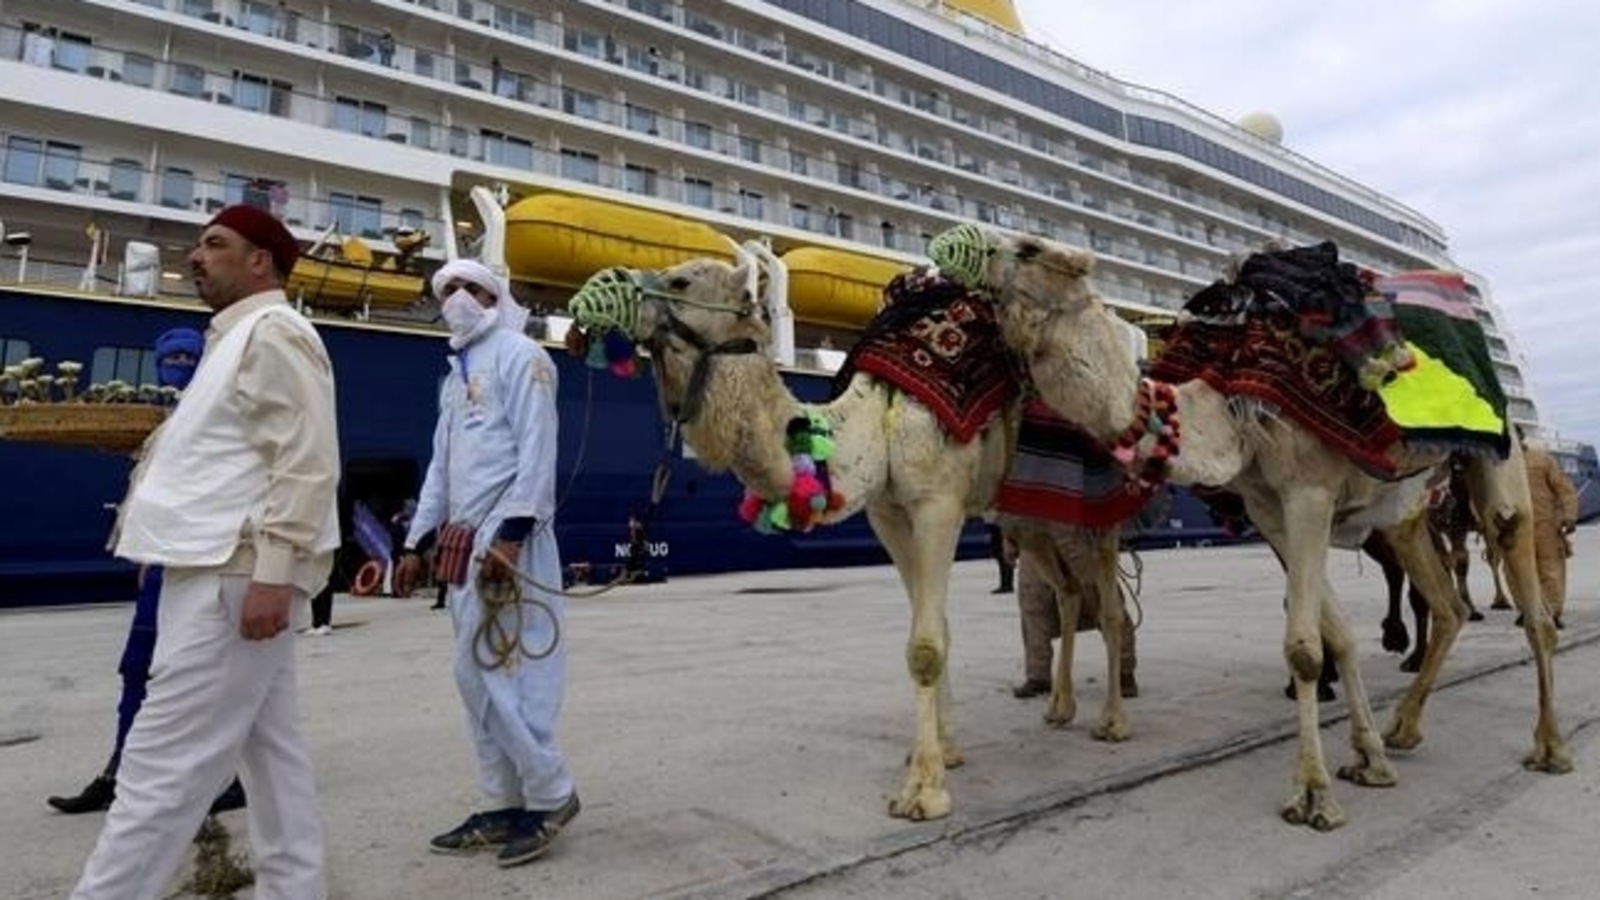 Too little, too late? Tourism sector revives in Middle East